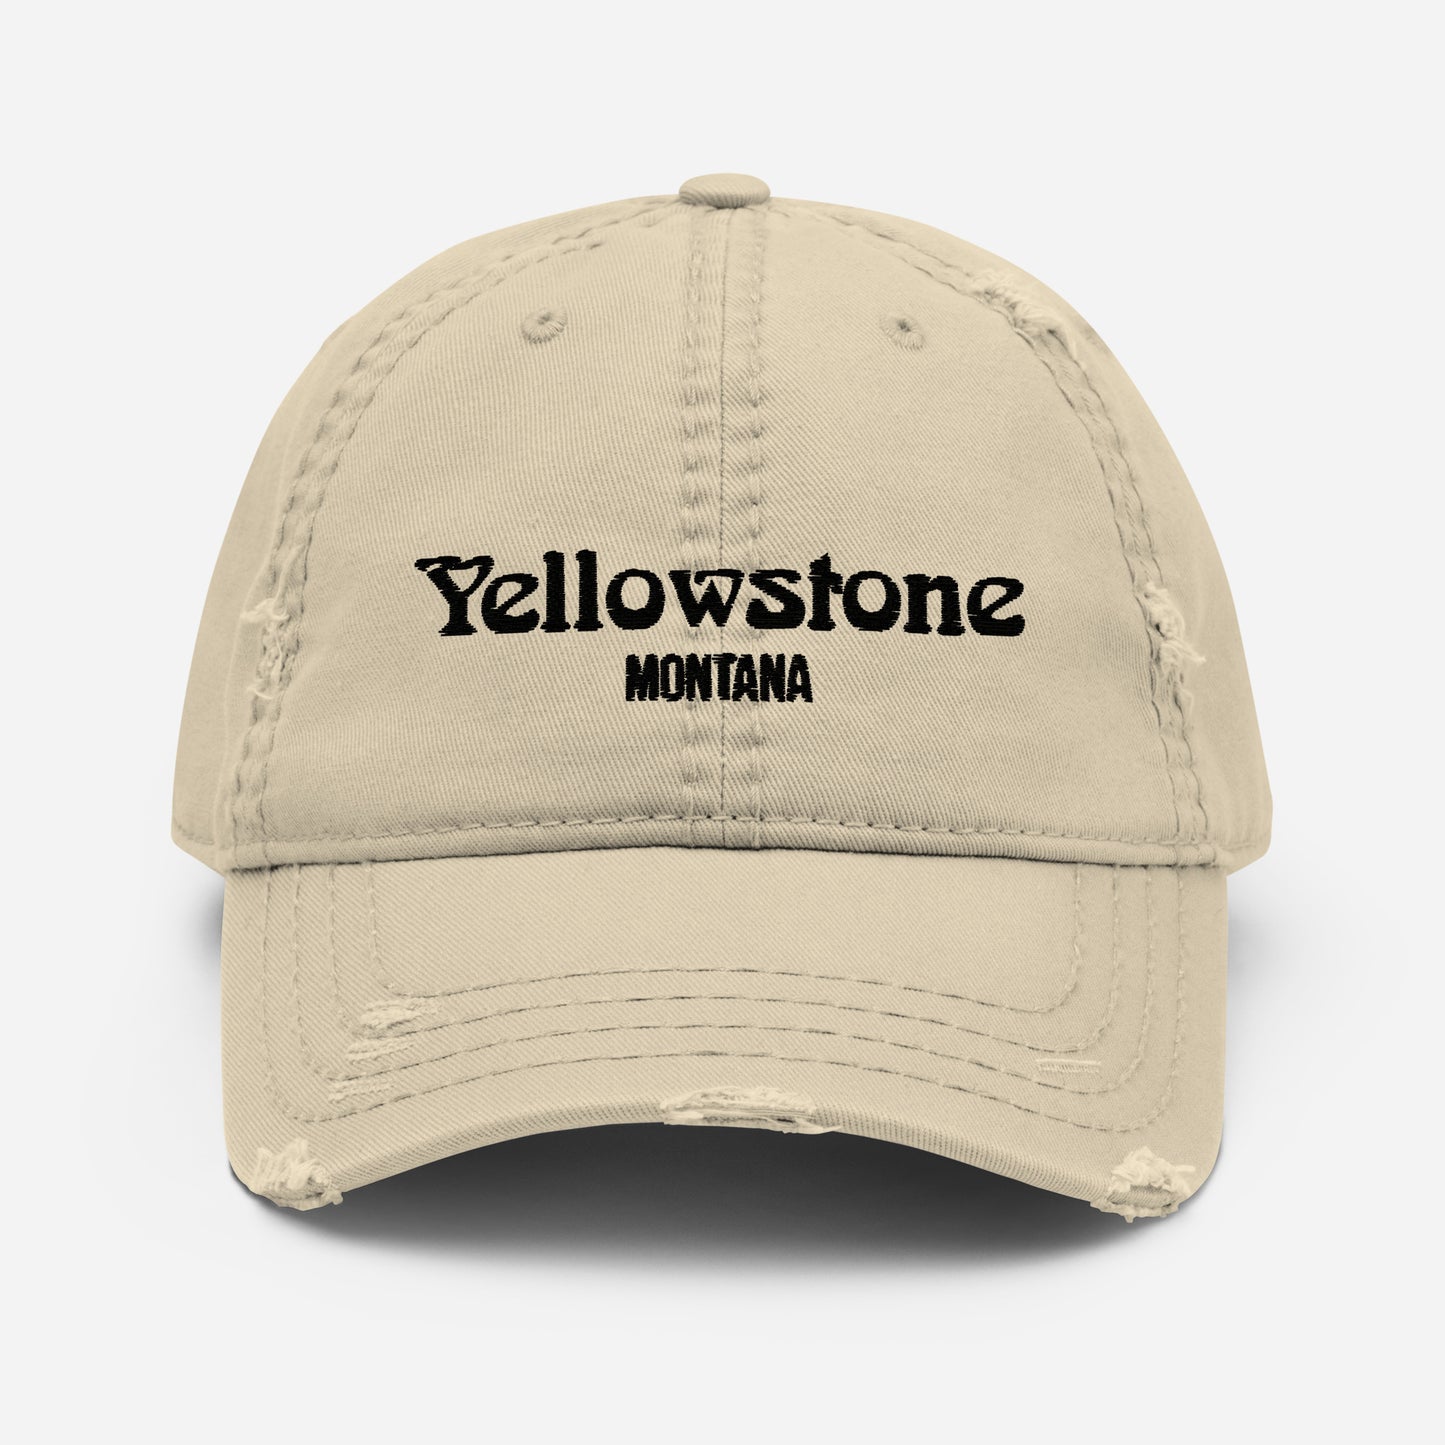 Yellowstone Distressed Embroidered Hat - On the Go with Princess O